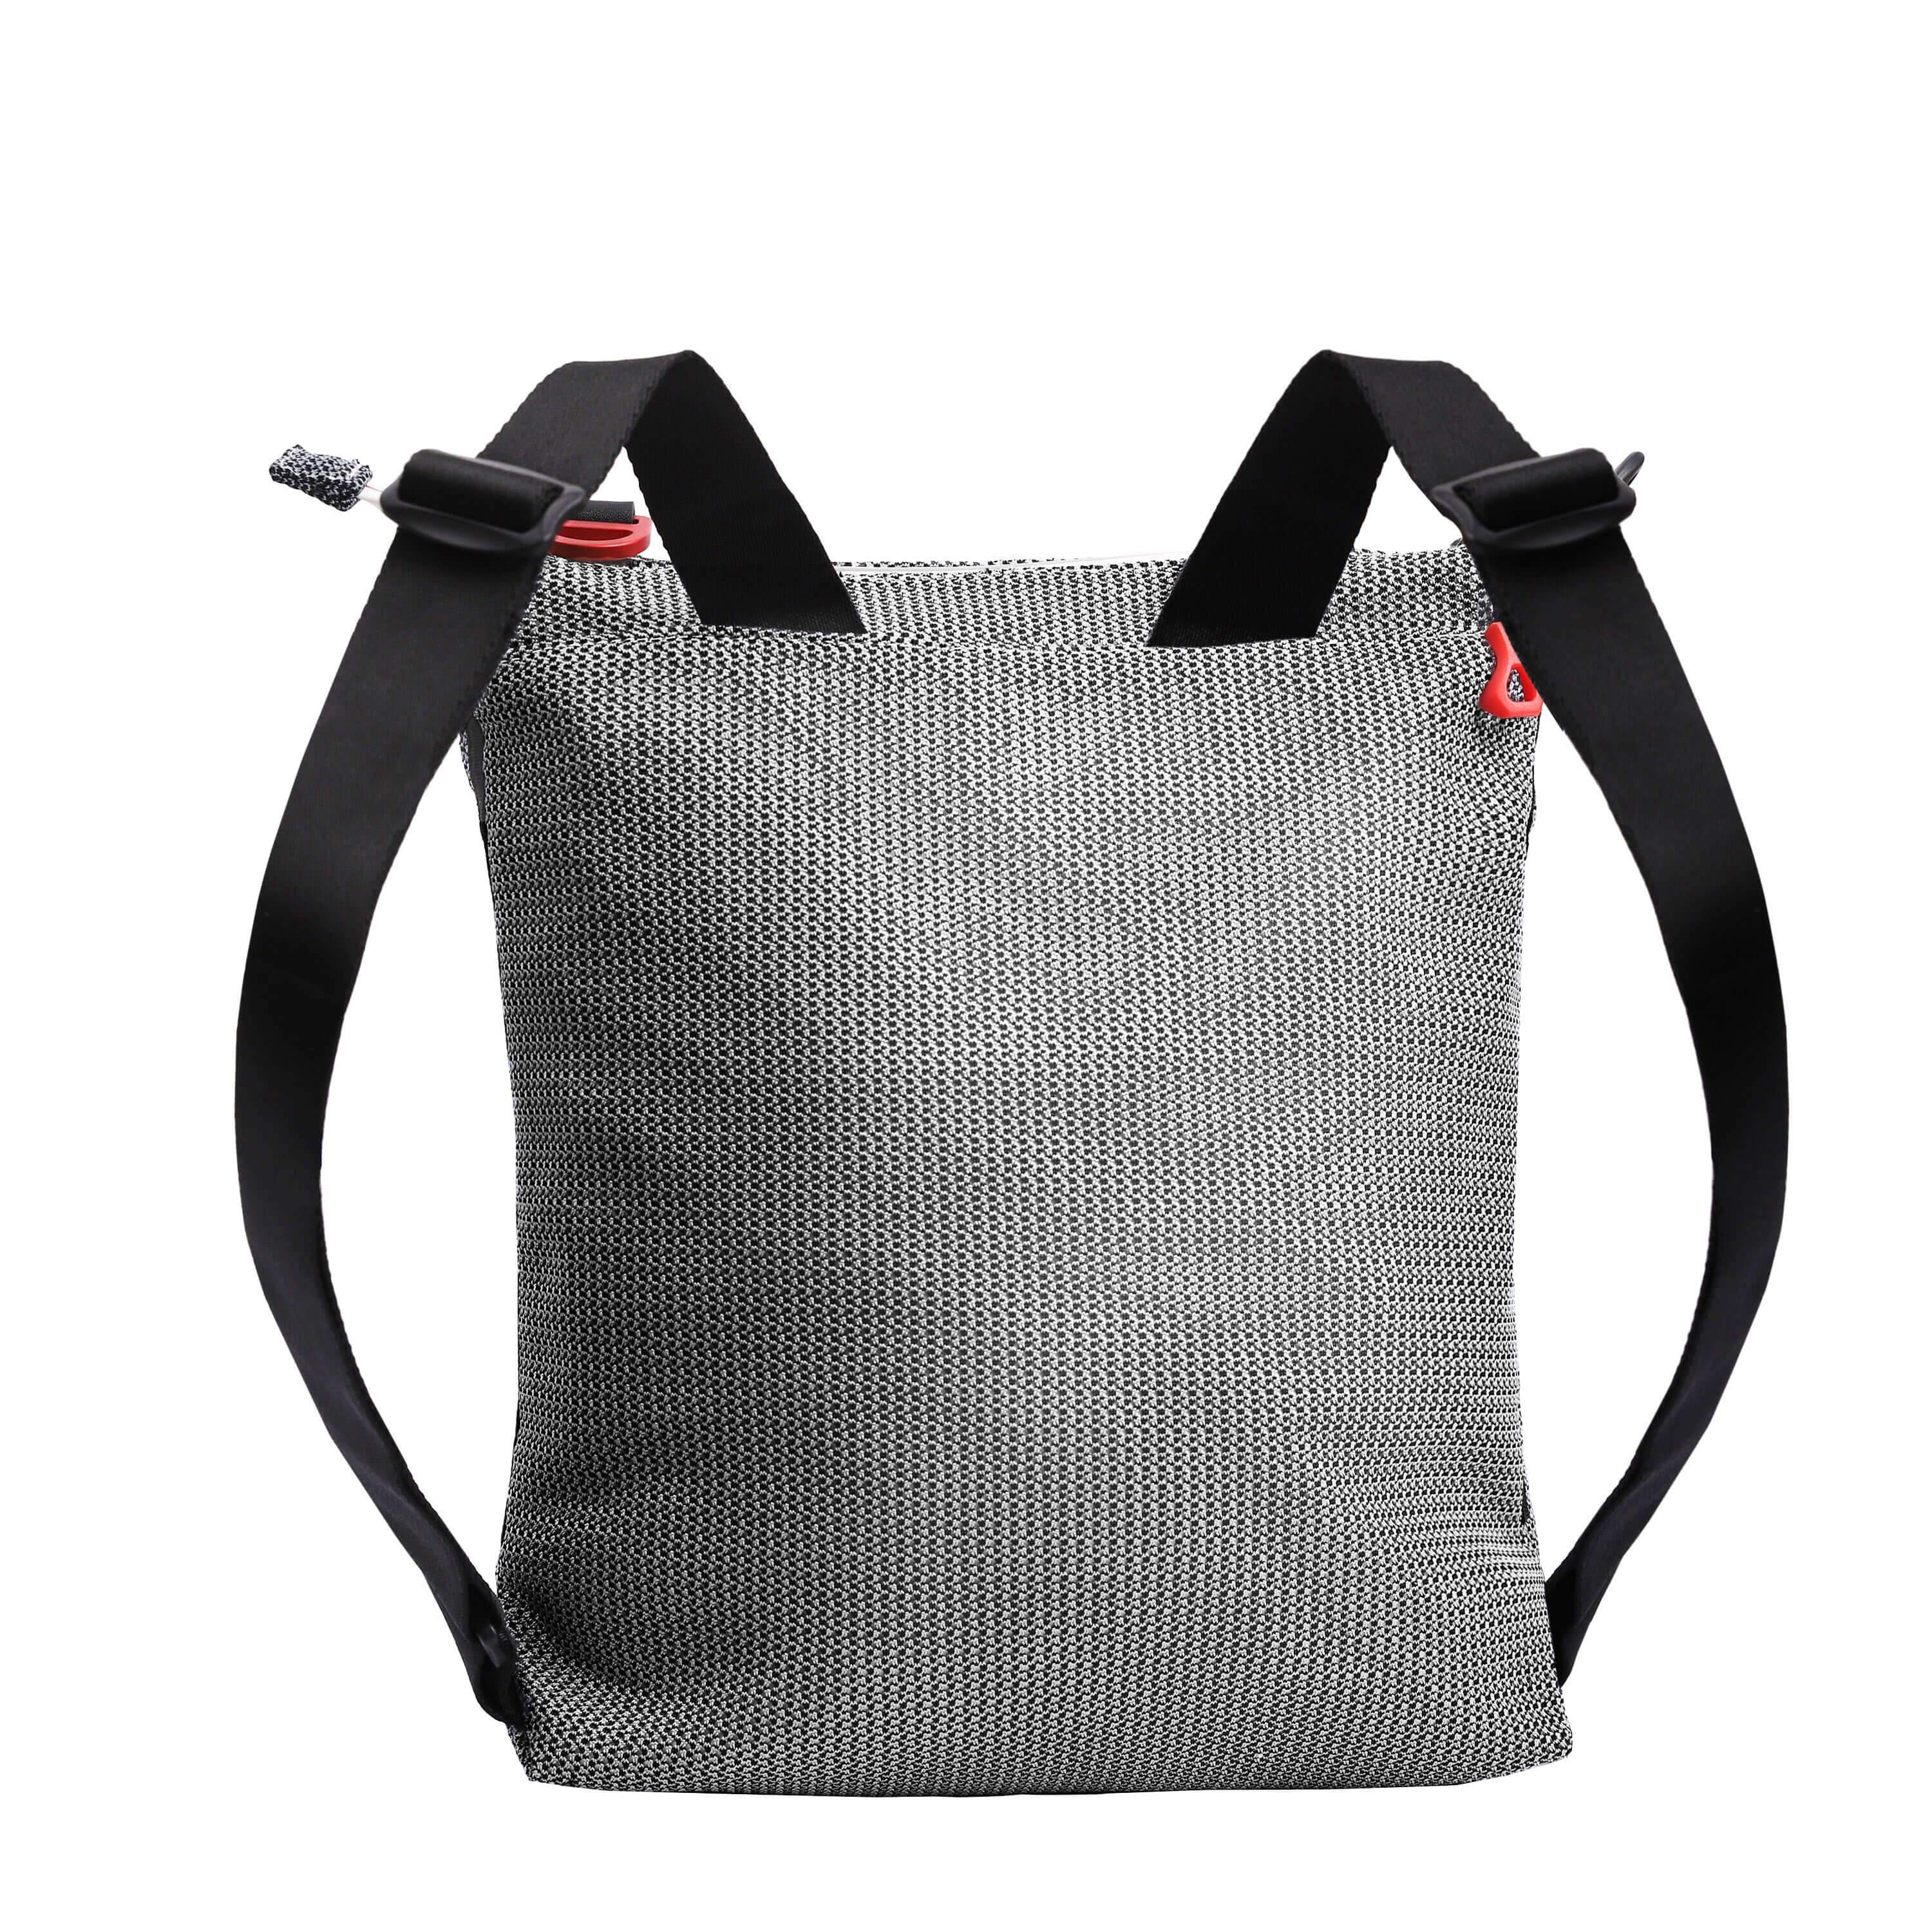 Back view of Sherpani convertible mesh bag, the Delanie. It has a black and white mesh pattern and features pops of red on the accent buckle and easy-pull zipper. The bag has adjustable backpack straps and an adjustable/detachable crossbody strap.